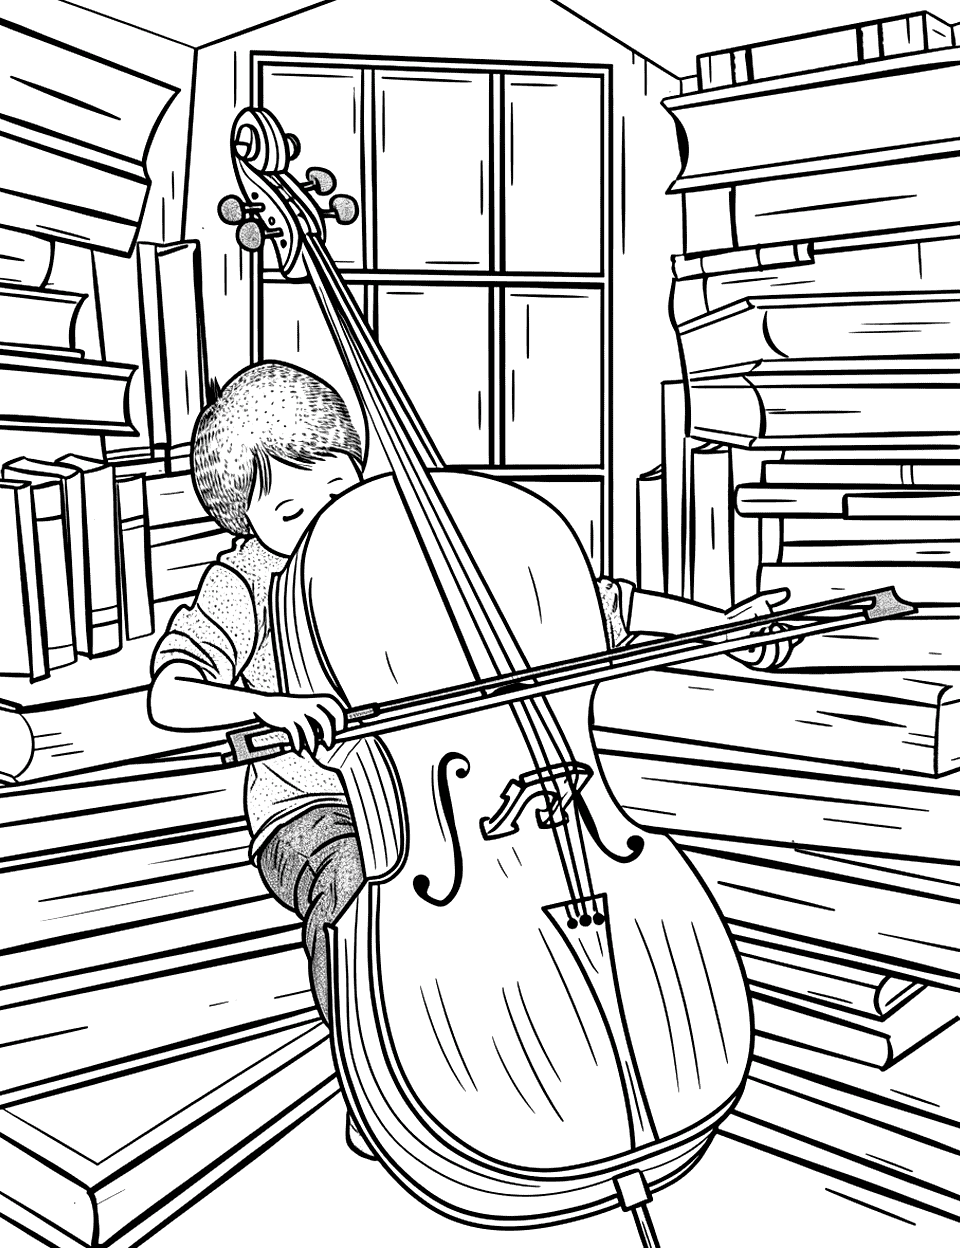 Cello Practice in the Attic Music Coloring Page - A child playing a cello in a cozy attic filled with books and a small window.